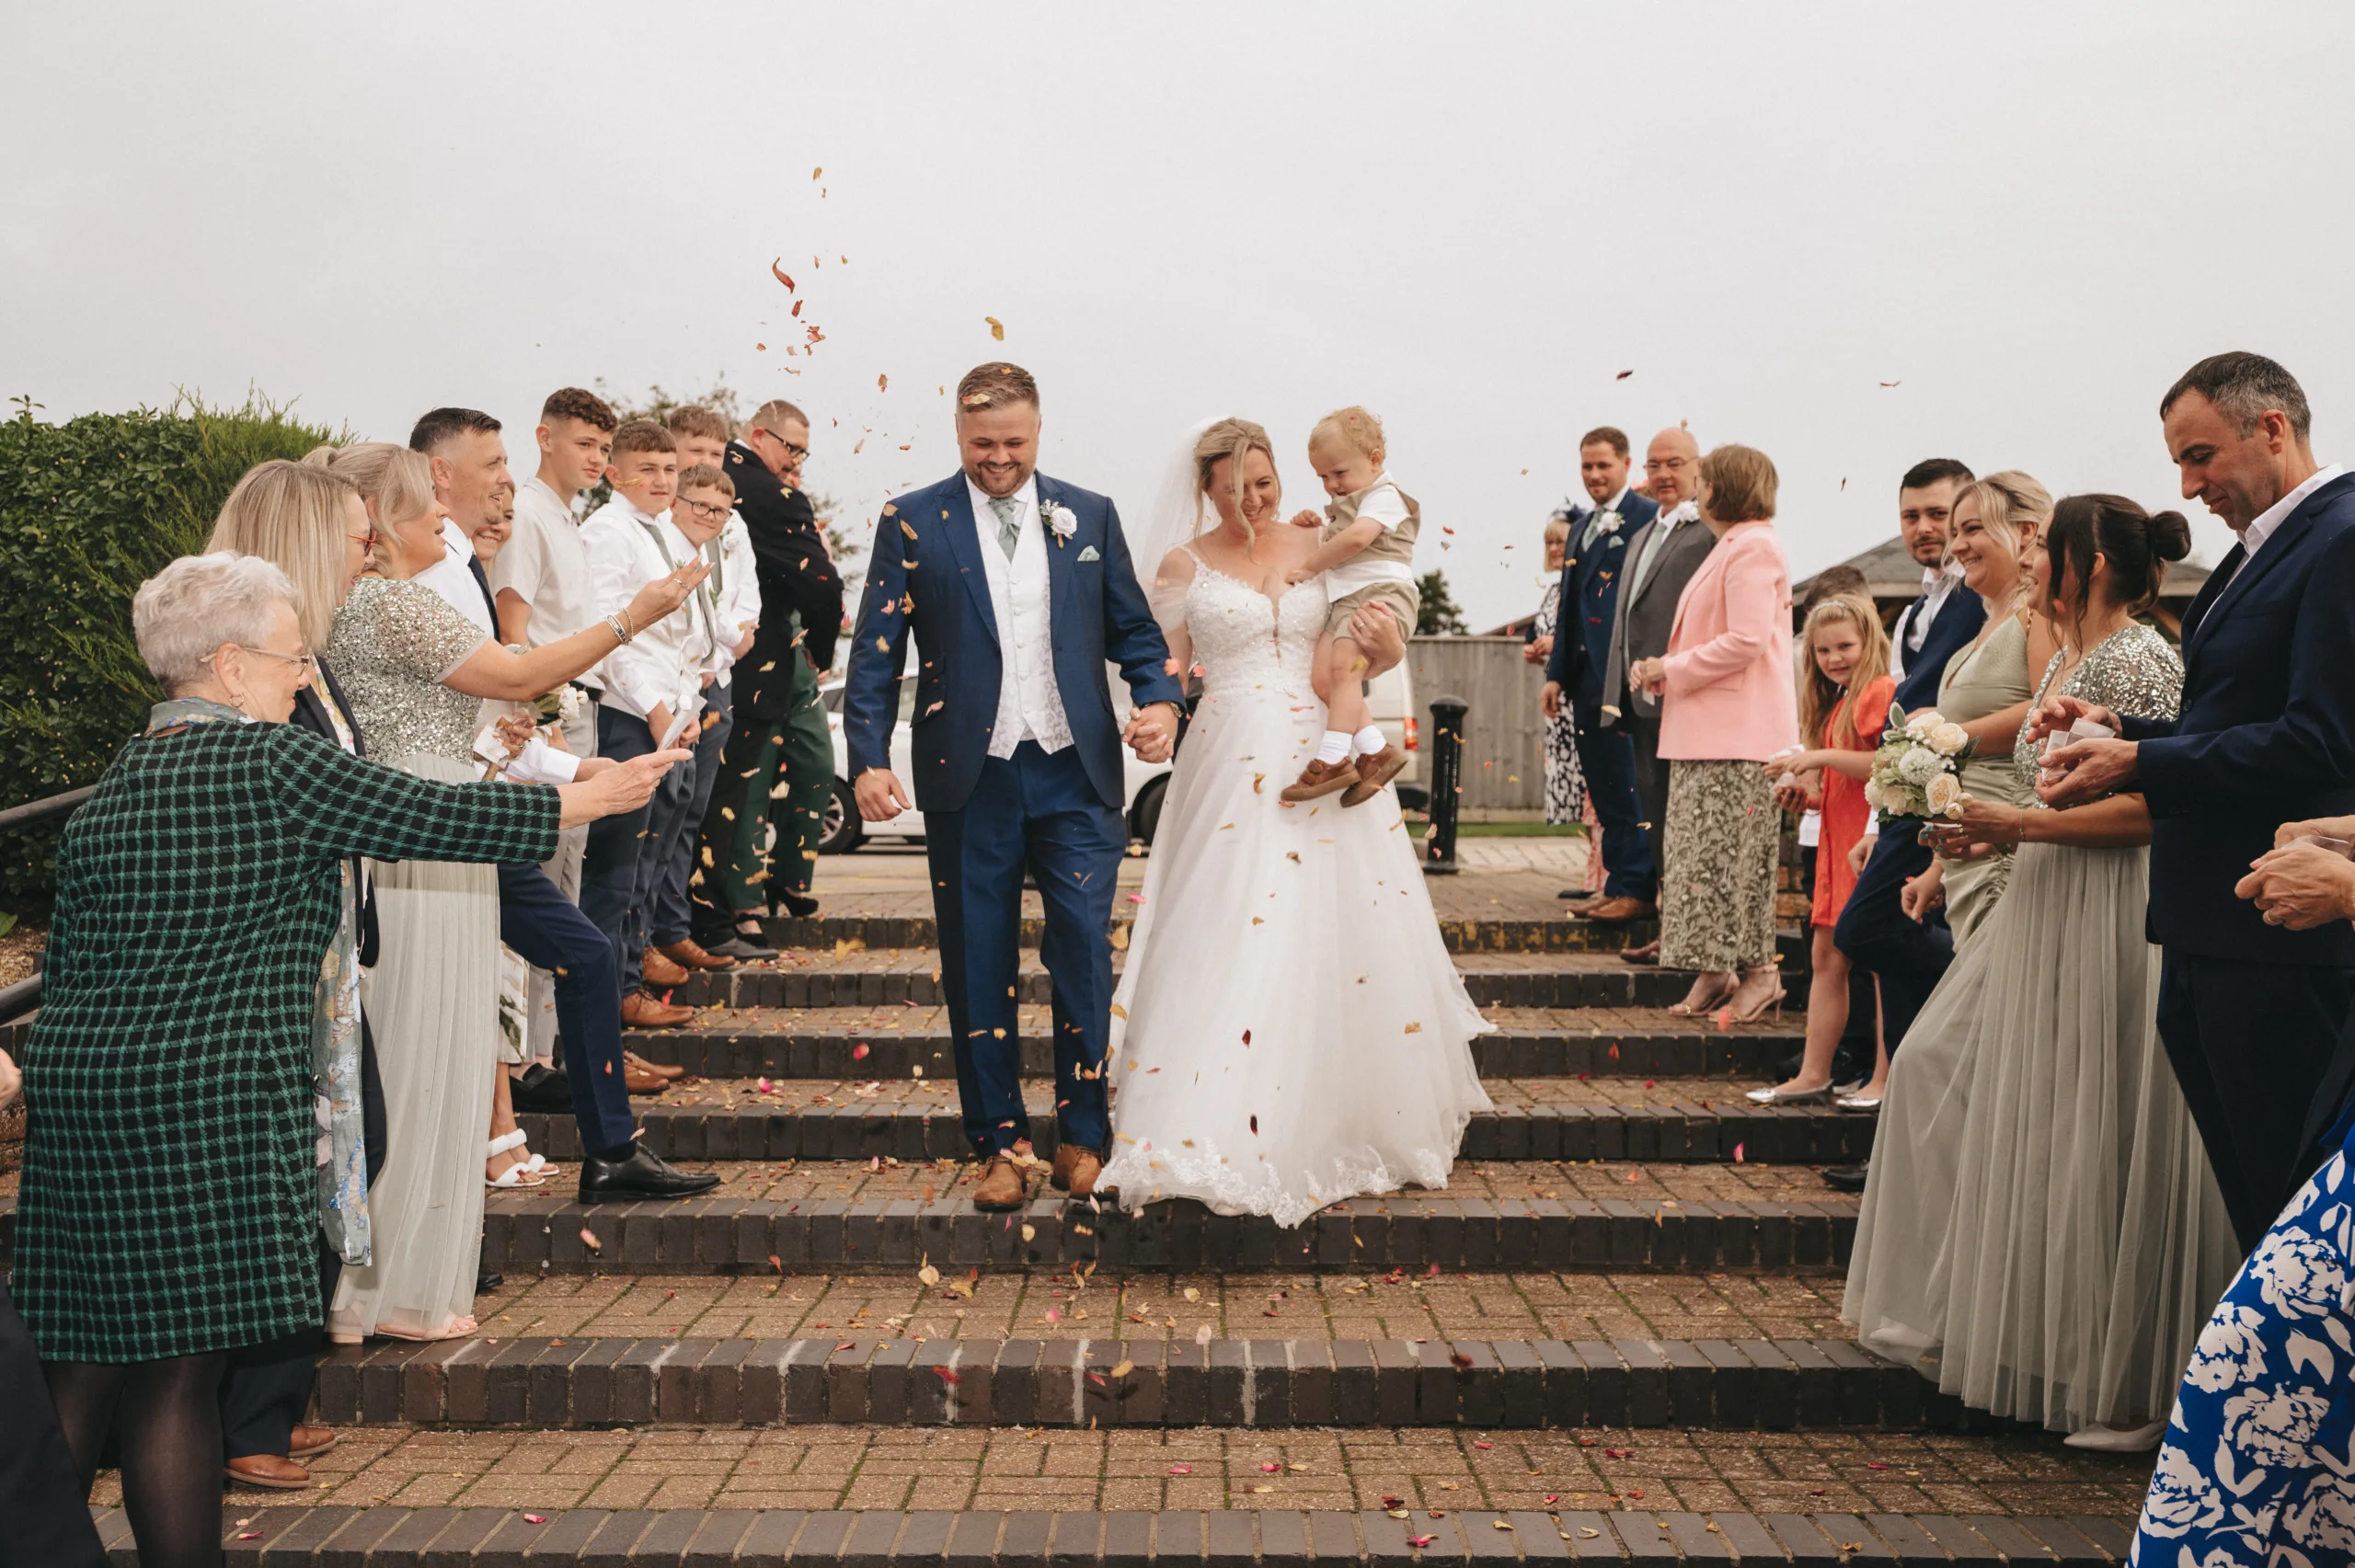 A wedding in Lincolnshire captured by a photographer, featuring the bride and groom walking down steps with confetti.